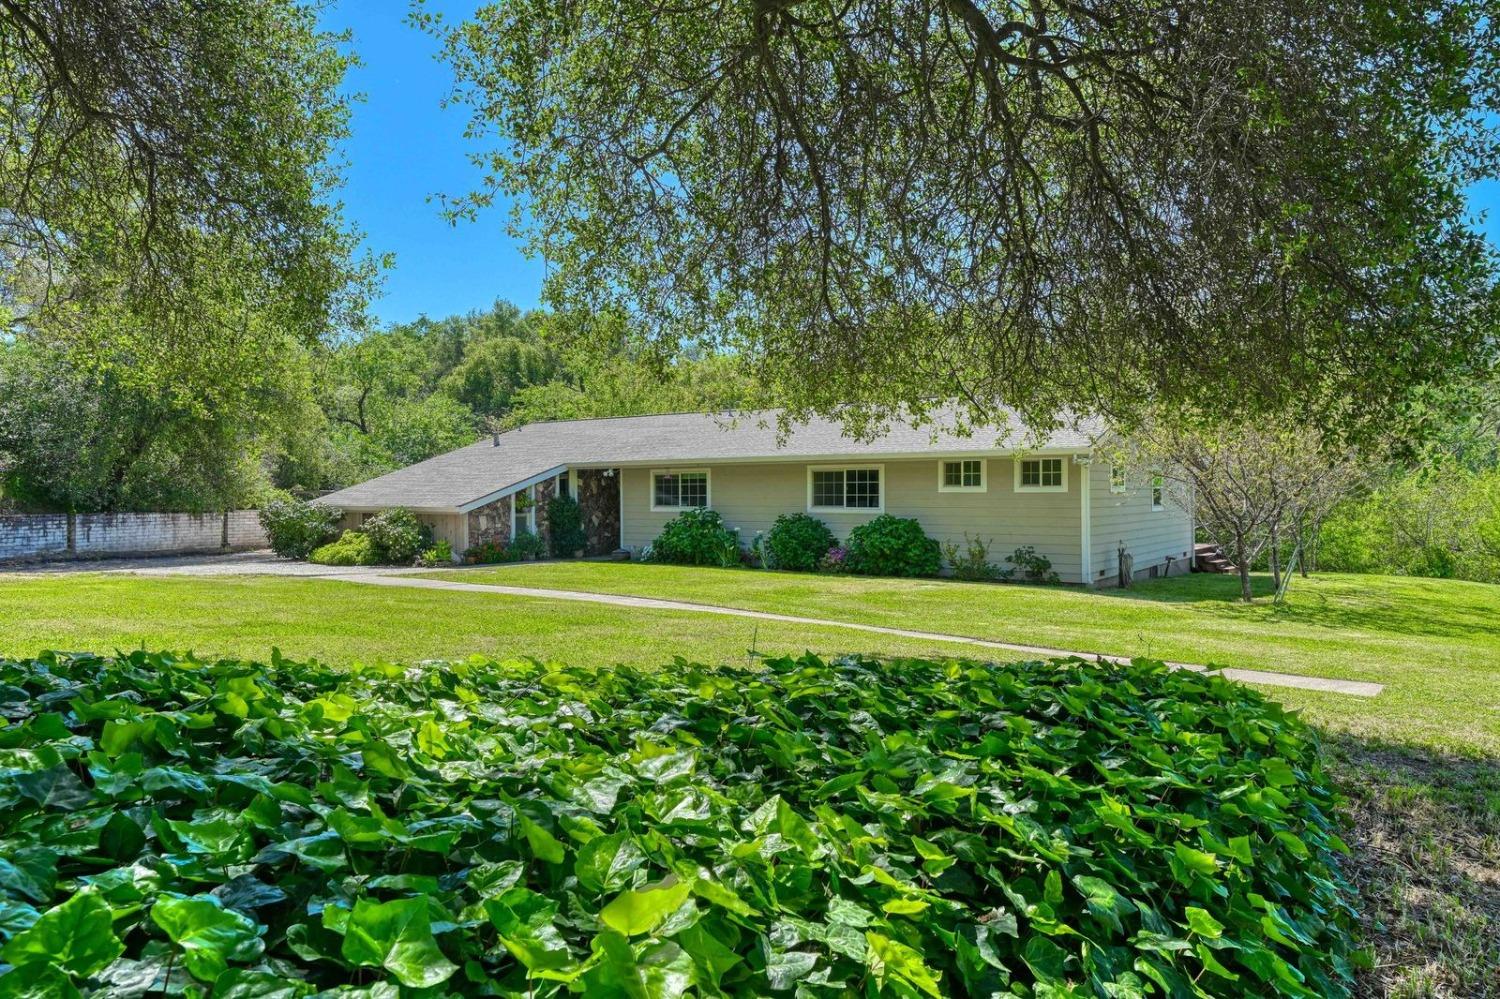 Photo of 3301 Sugarloaf Mountain Rd in Loomis, CA